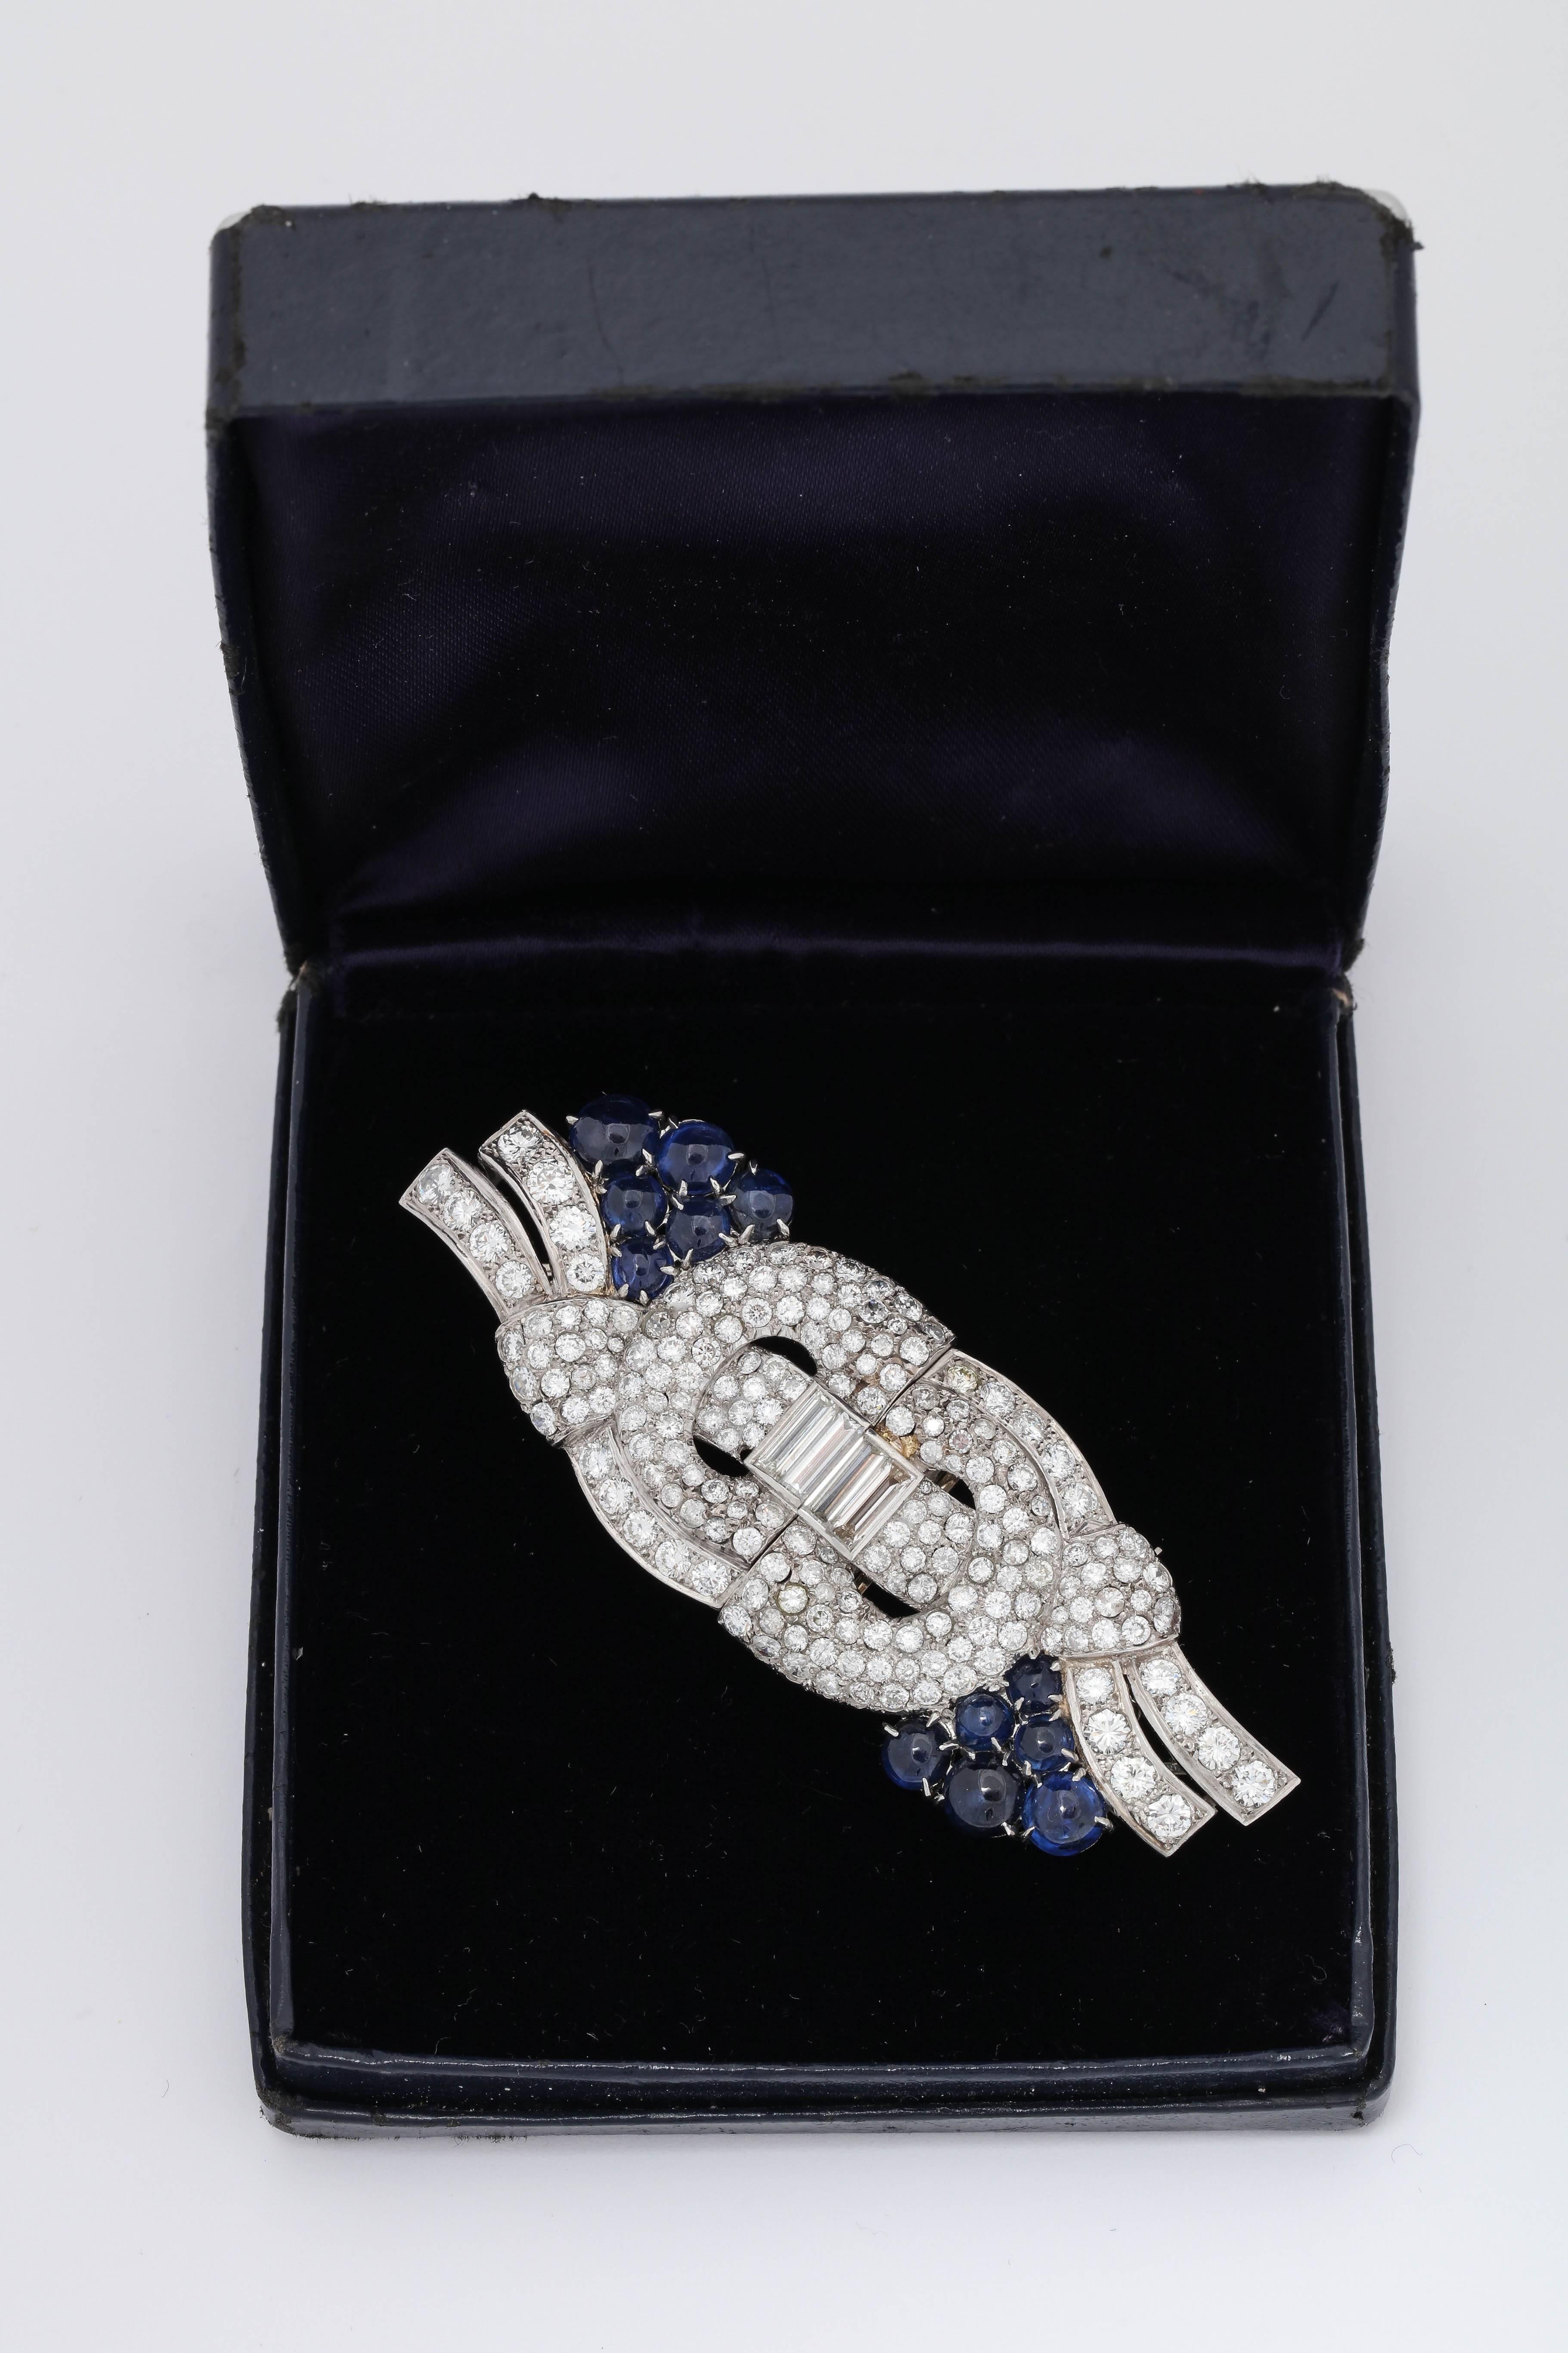 One Ladies  Three Dimensional Platinum Convertible Brooch Embellished With {12} Cabochon Beautiful Color Sapphires Weighing Approximately {5} Carats Total weight.Brooch Further Embellished With Numerous Round Cut Diamonds Weighing Approximately {11}